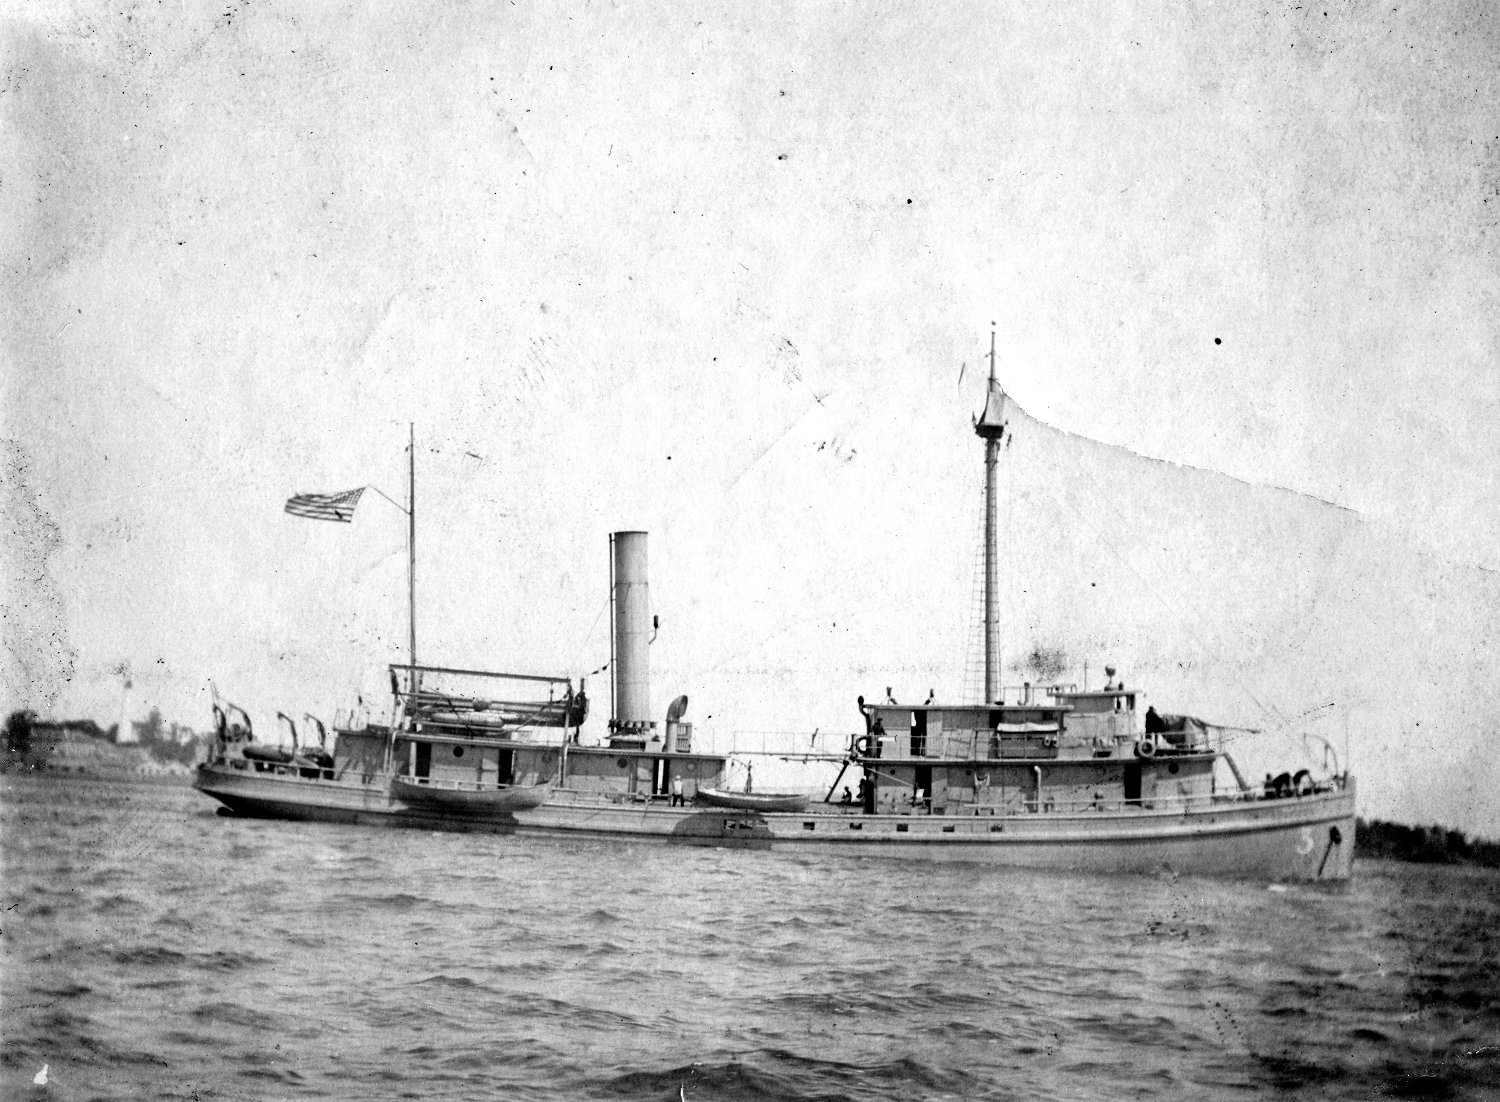 Photo of USS James, which served in European waters in World War I and was lost in a gale off the coast of France. (Naval History and Heritage Command)